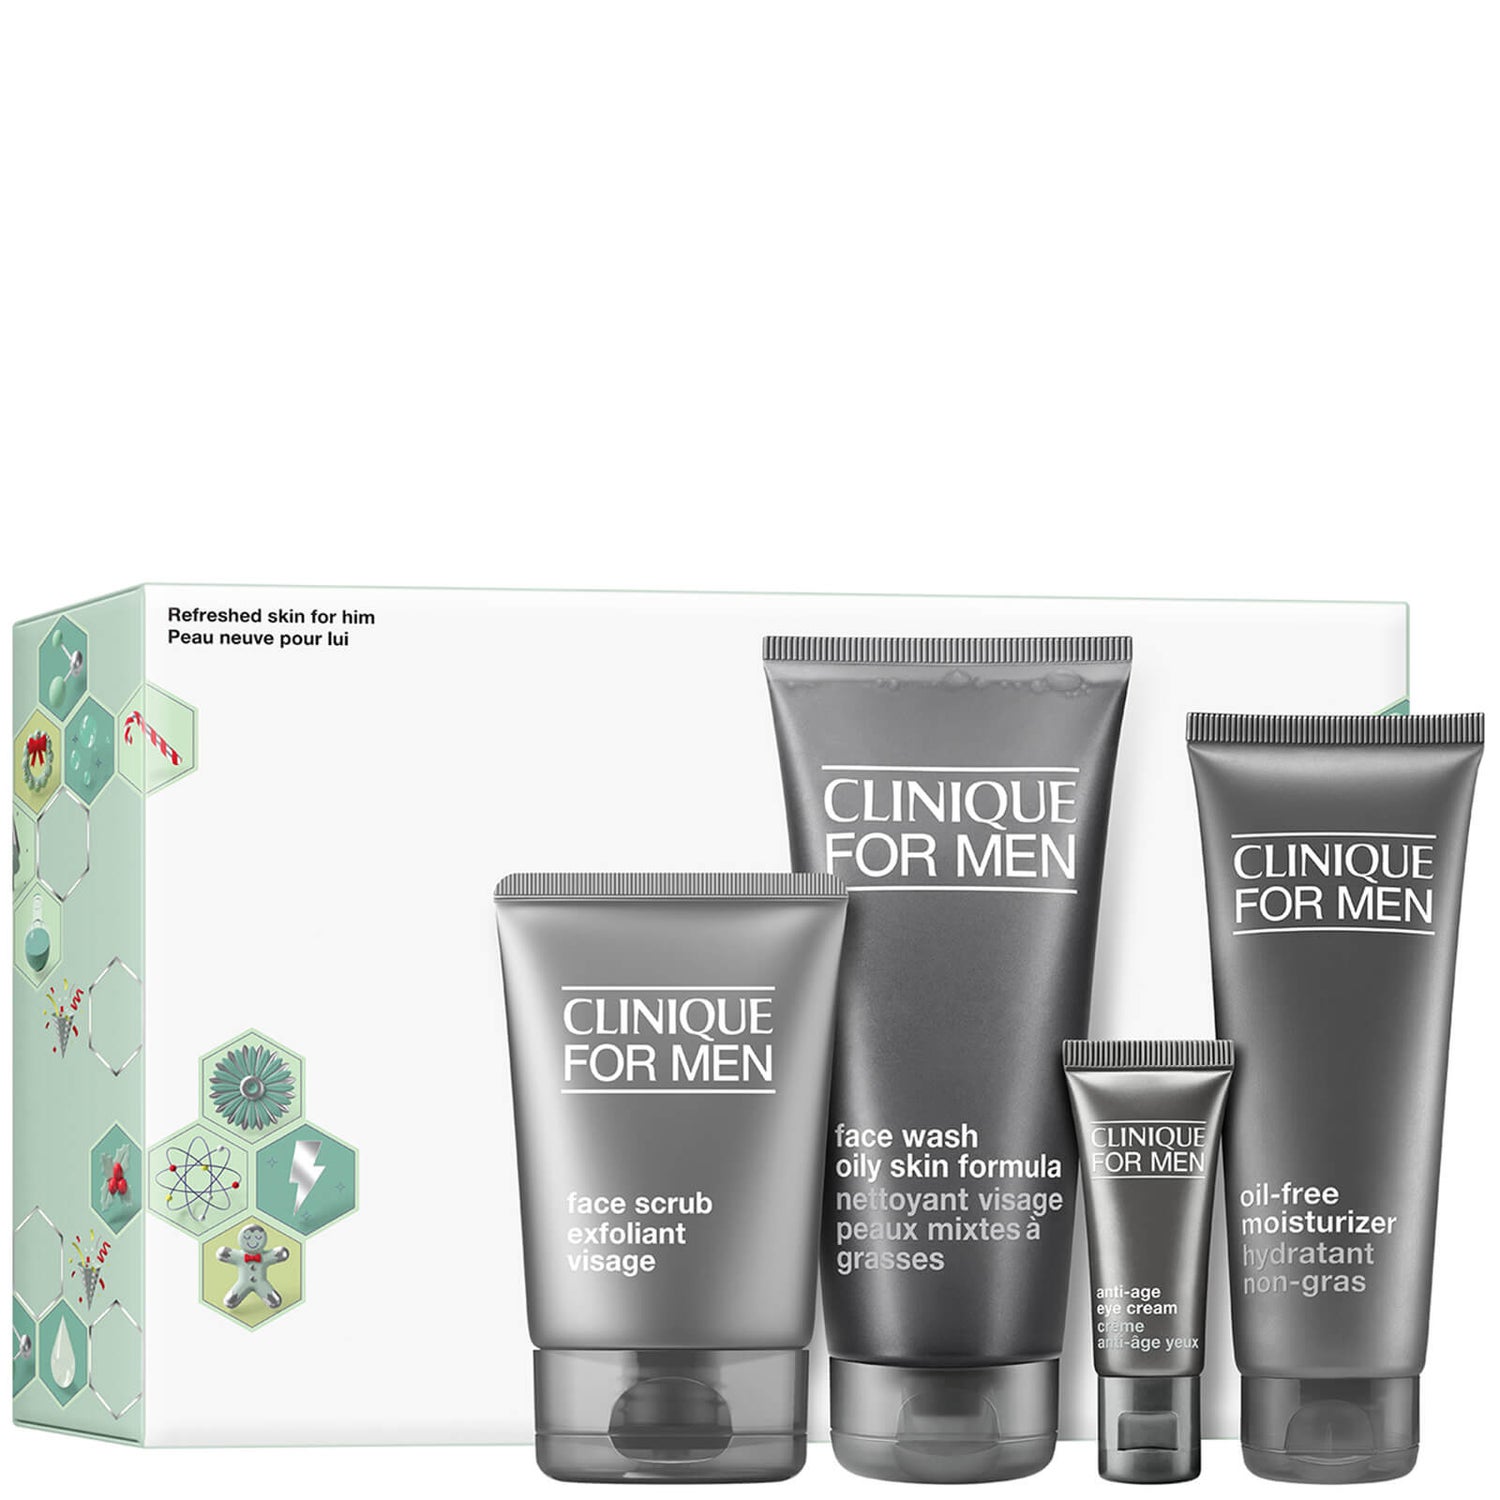 Clinique For Men Great Skin Essentials Skincare Gift Set for Oily Skin Types (Worth £100.00)